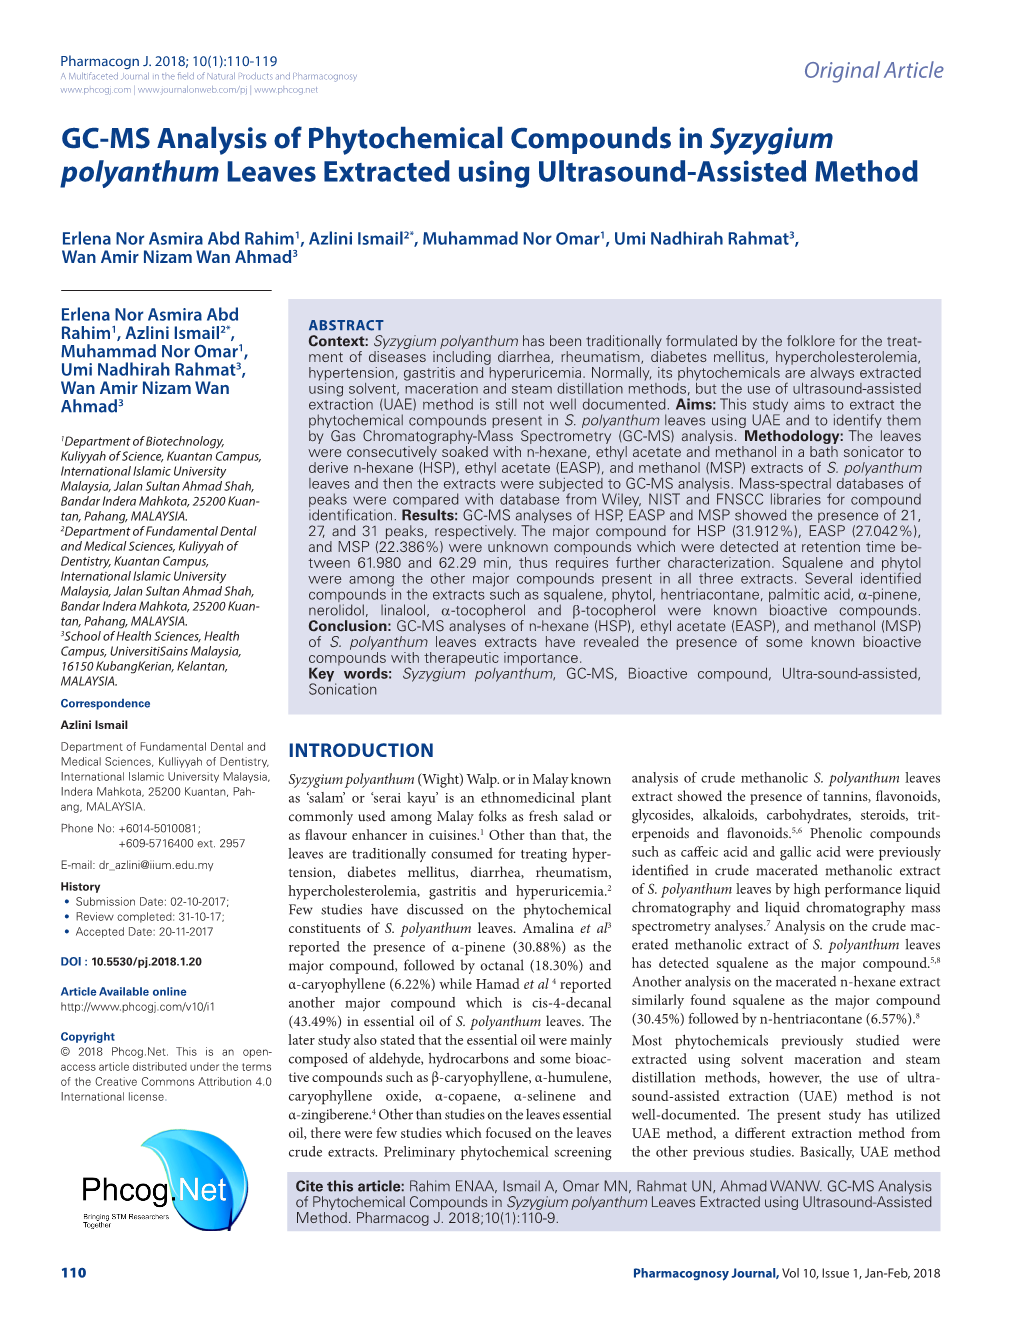 GC-MS Analysis of Phytochemical Compounds in Syzygium Polyanthum Leaves Extracted Using Ultrasound-Assisted Method